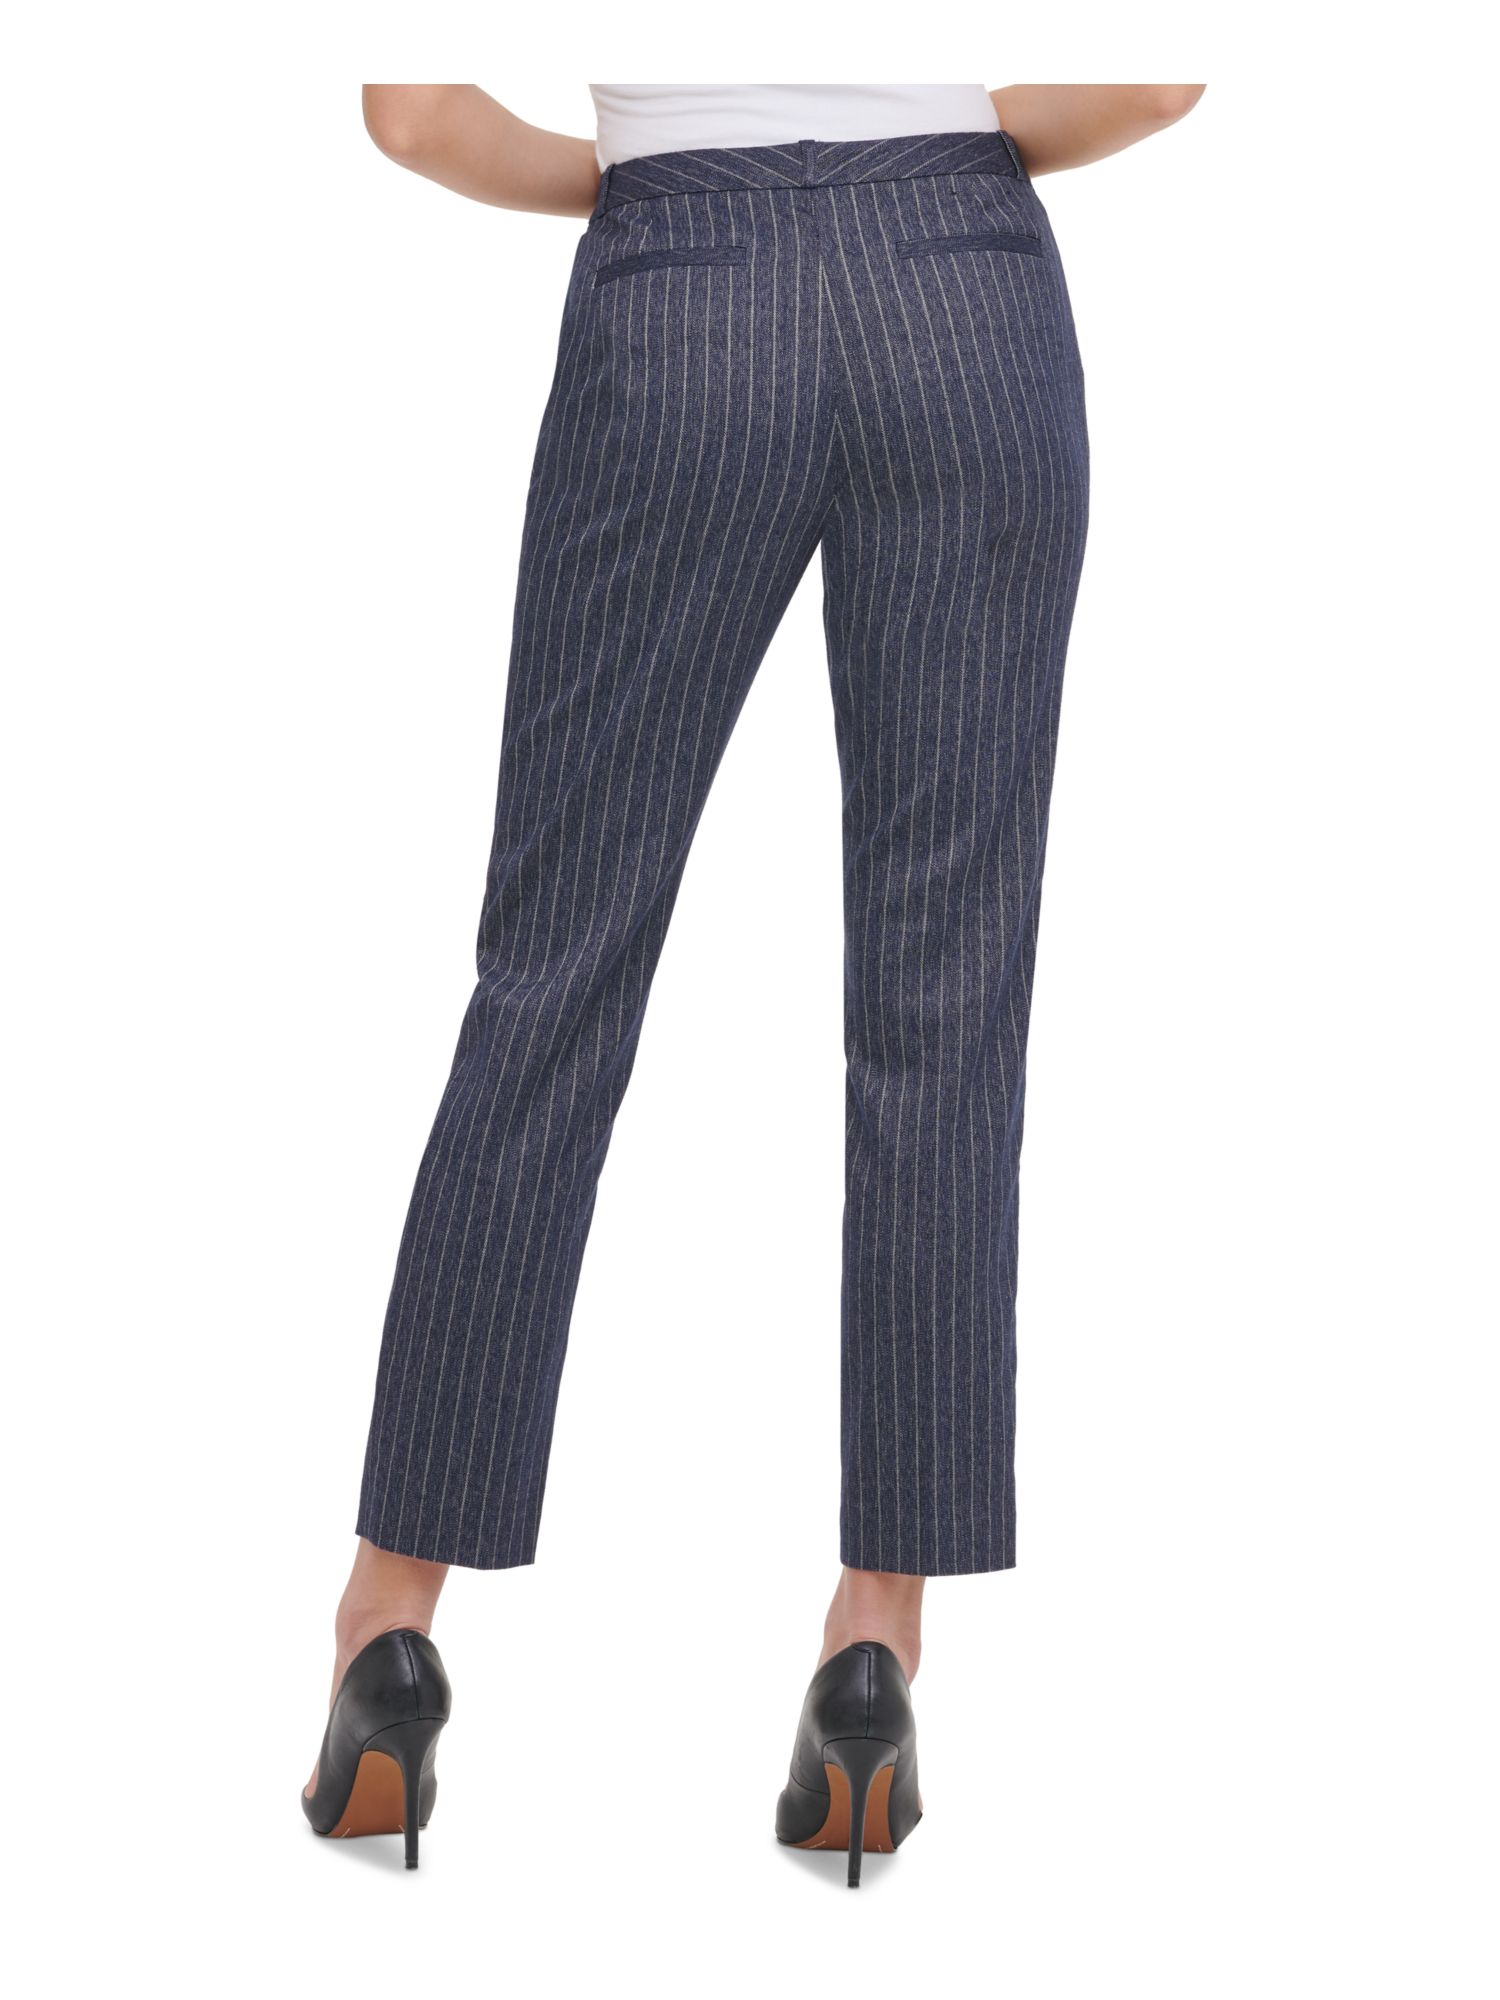 TOMMY HILFIGER Womens Navy Zippered Pinstripe Pants Size: 12 - image 2 of 4